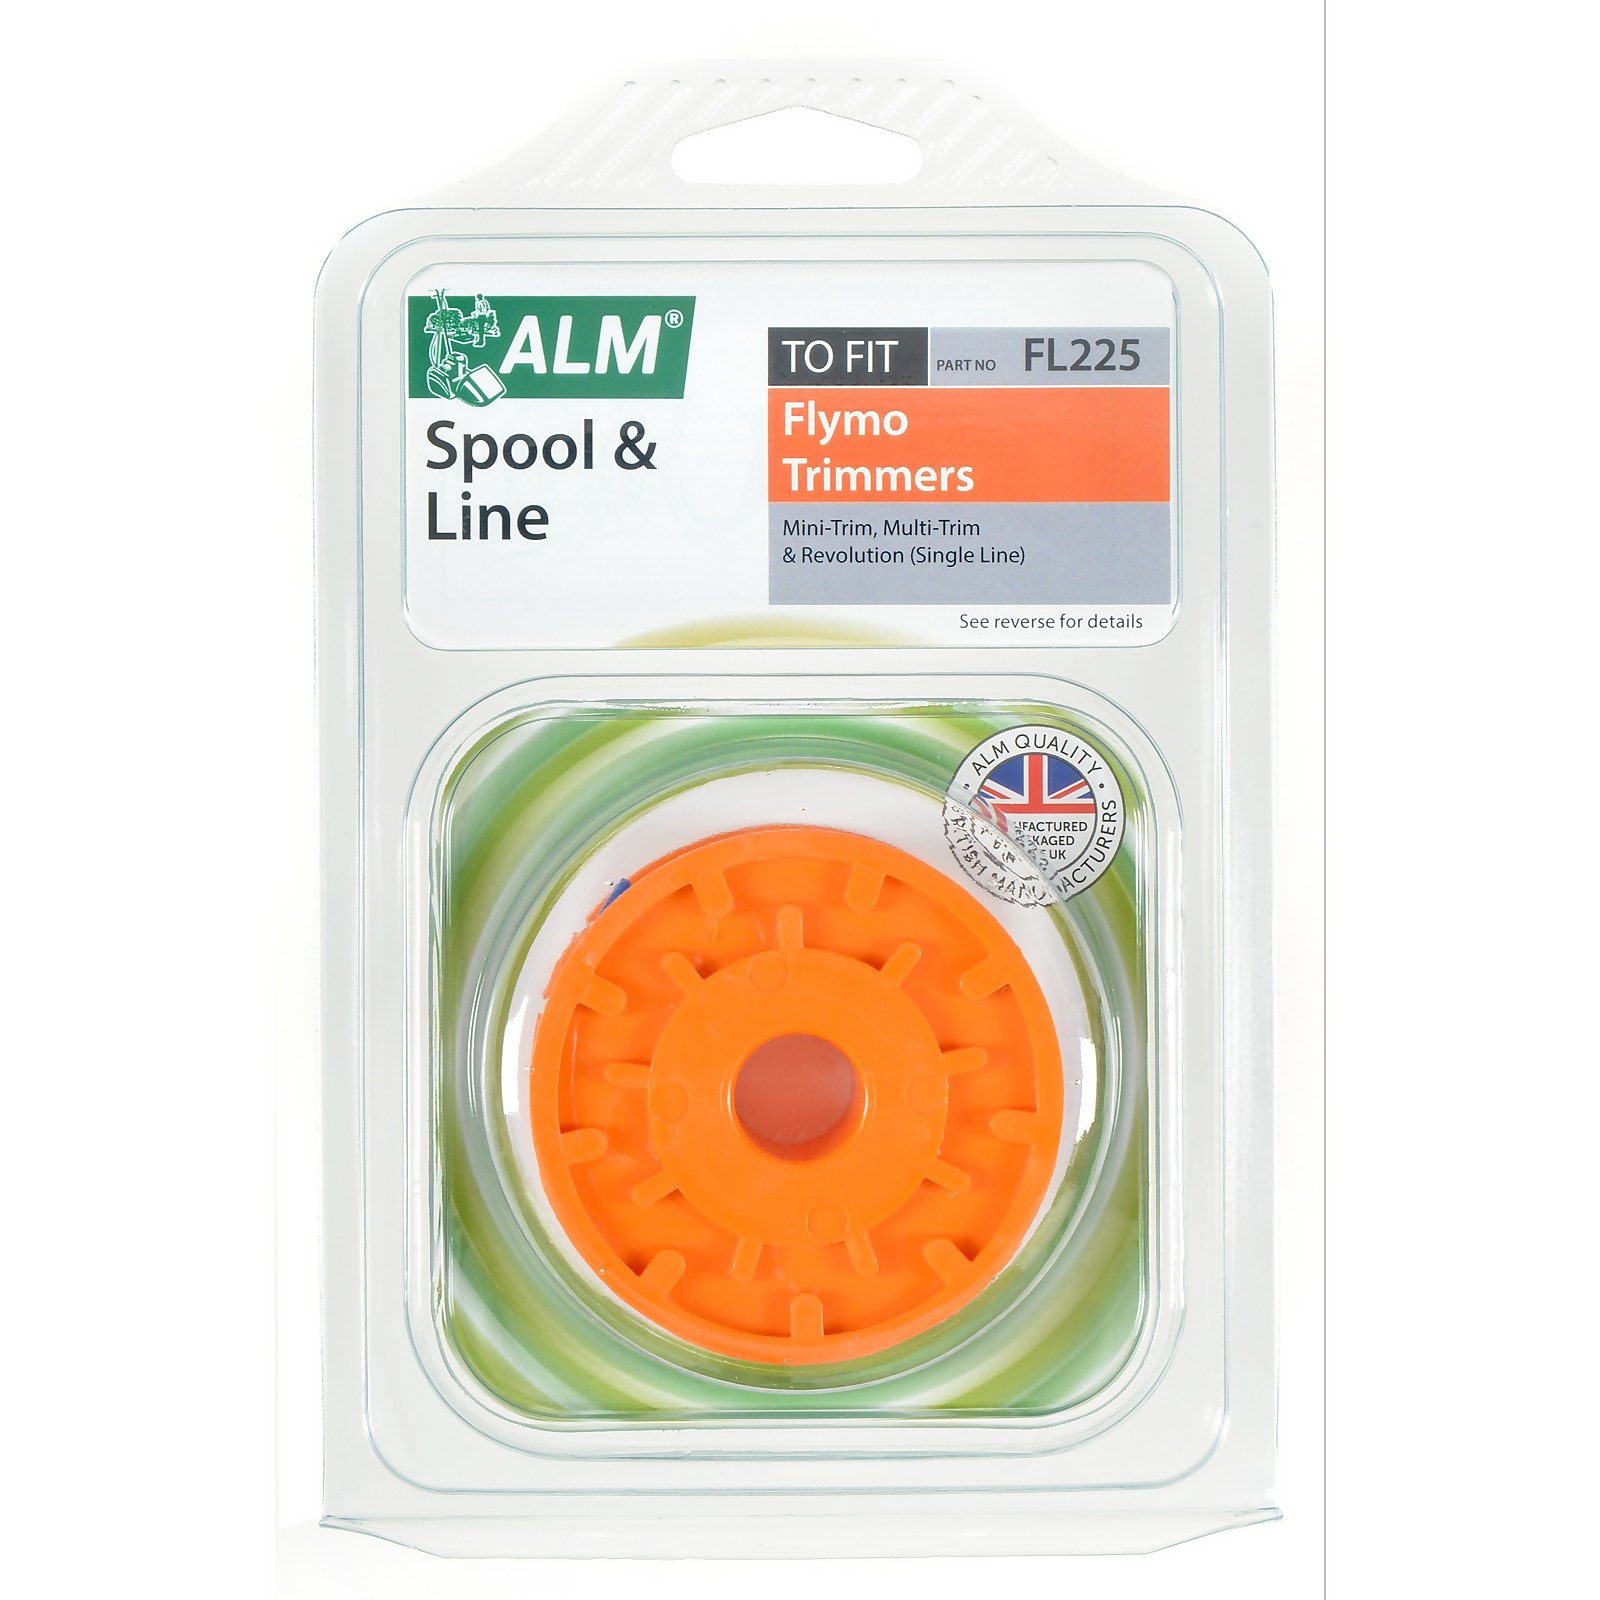 Photo of Alm Fl225 Replacement Spool & Line - Flymo Trimmers